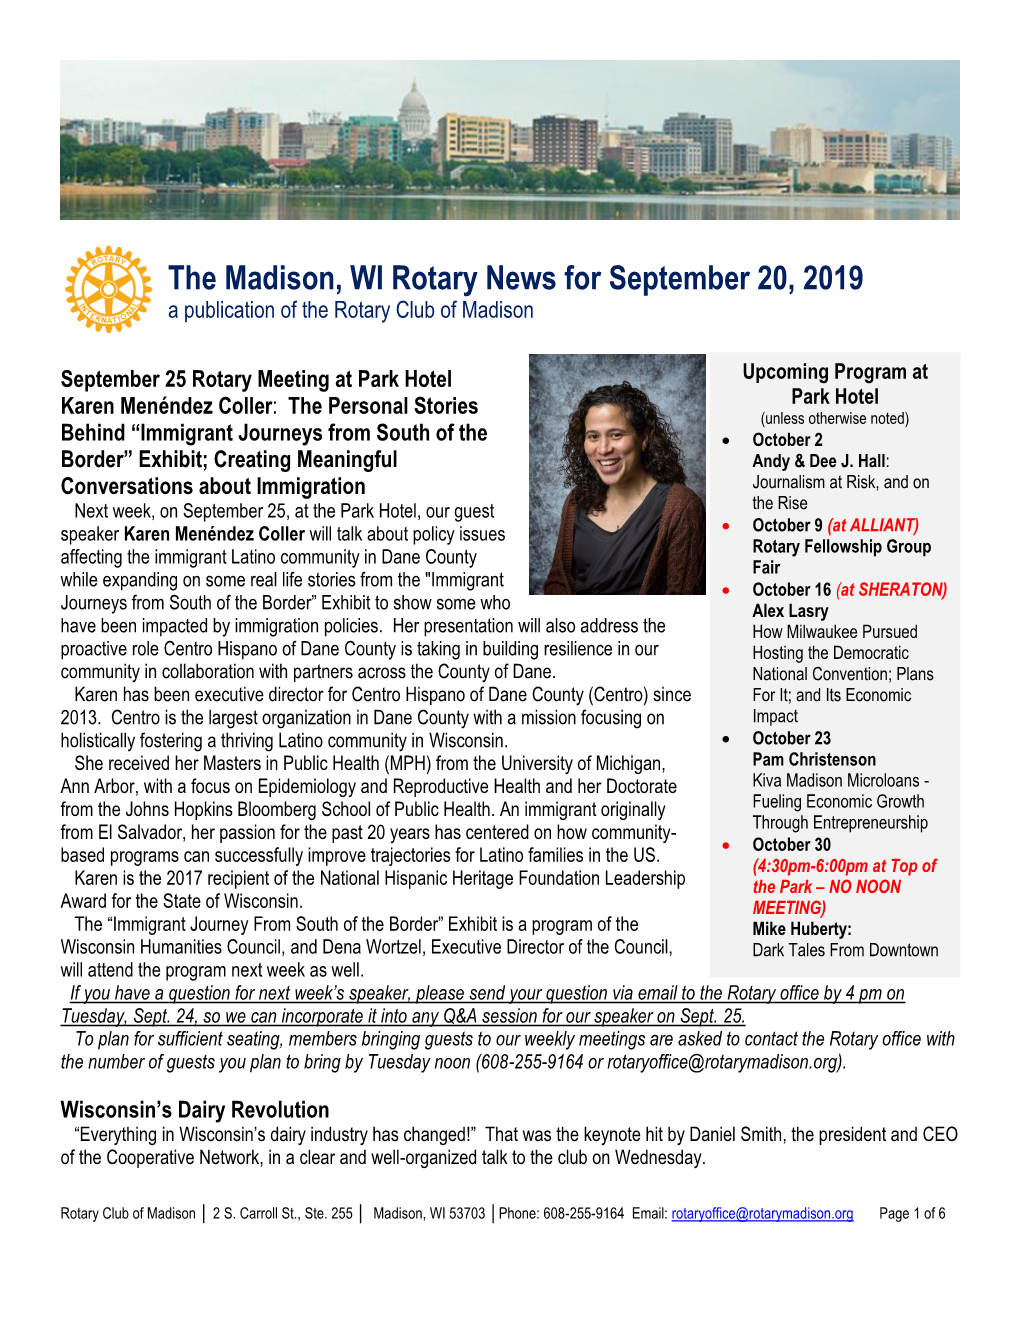 The Madison, WI Rotary News for September 20, 2019 a Publication of the Rotary Club of Madison